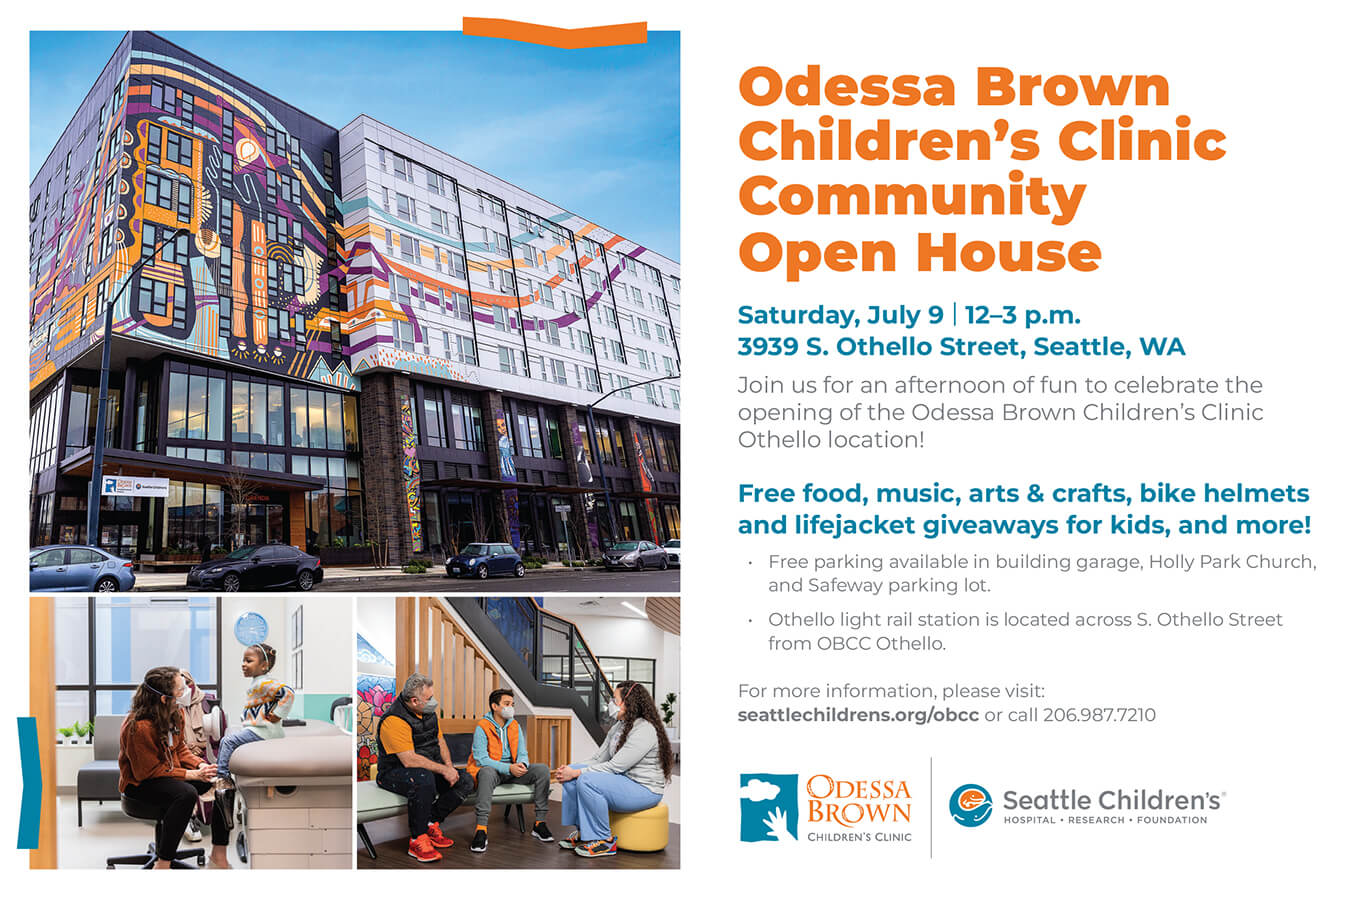 Image of postcard advertising Odessa Brown Children’s Clinic Community Open House, Saturday, July 9, 12–3 p.m., 3939 S. Othello Street, Seattle